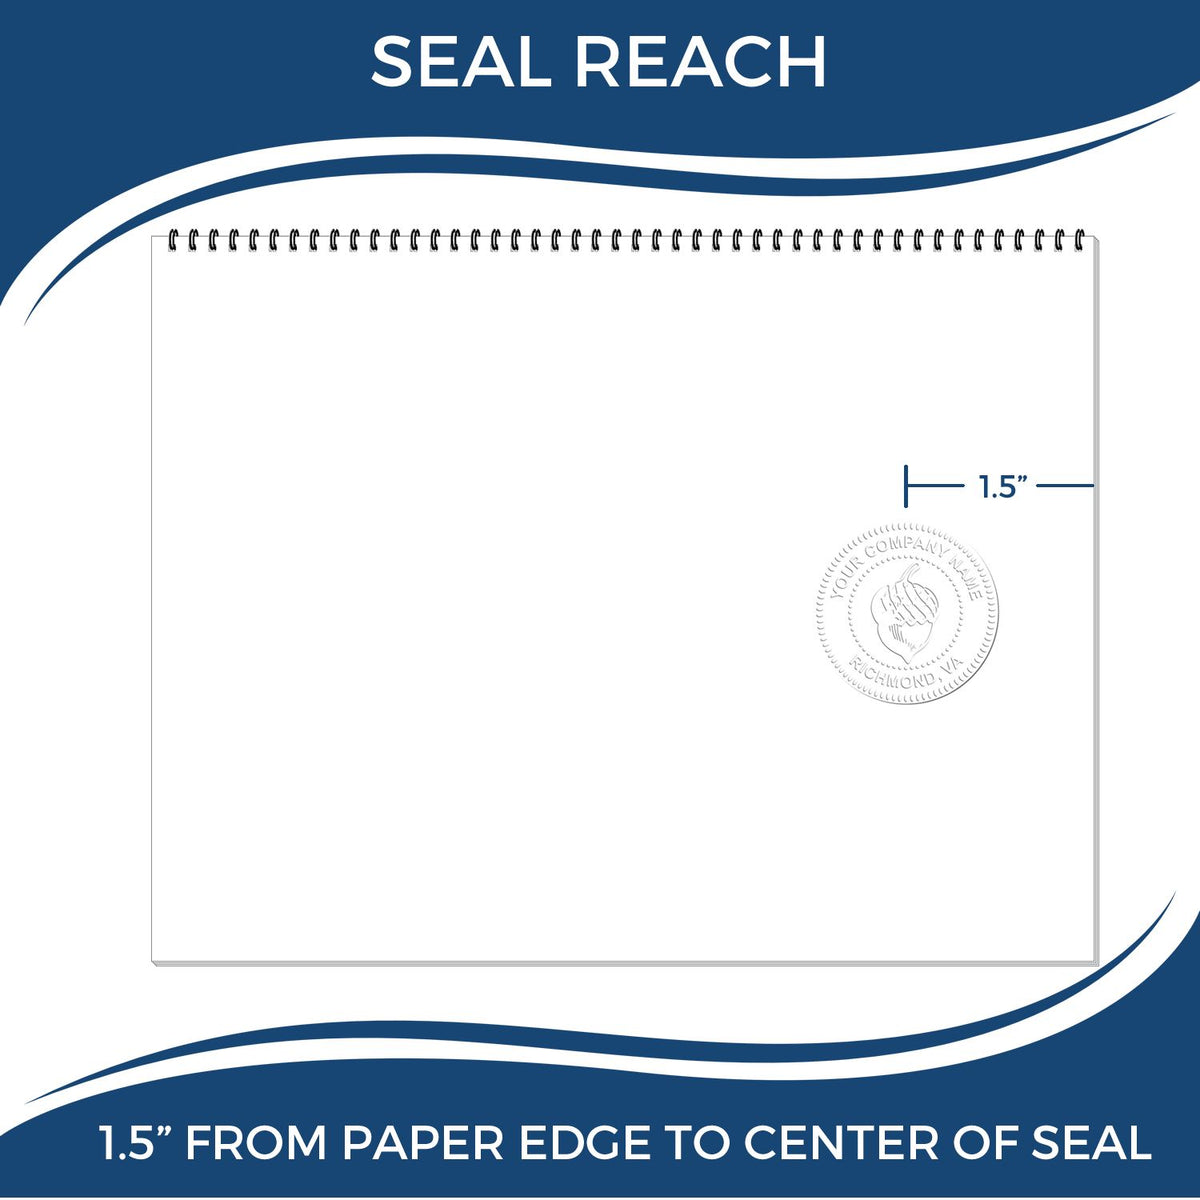 An infographic showing the seal reach which is represented by a ruler and a miniature seal image of the Gift South Carolina Land Surveyor Seal